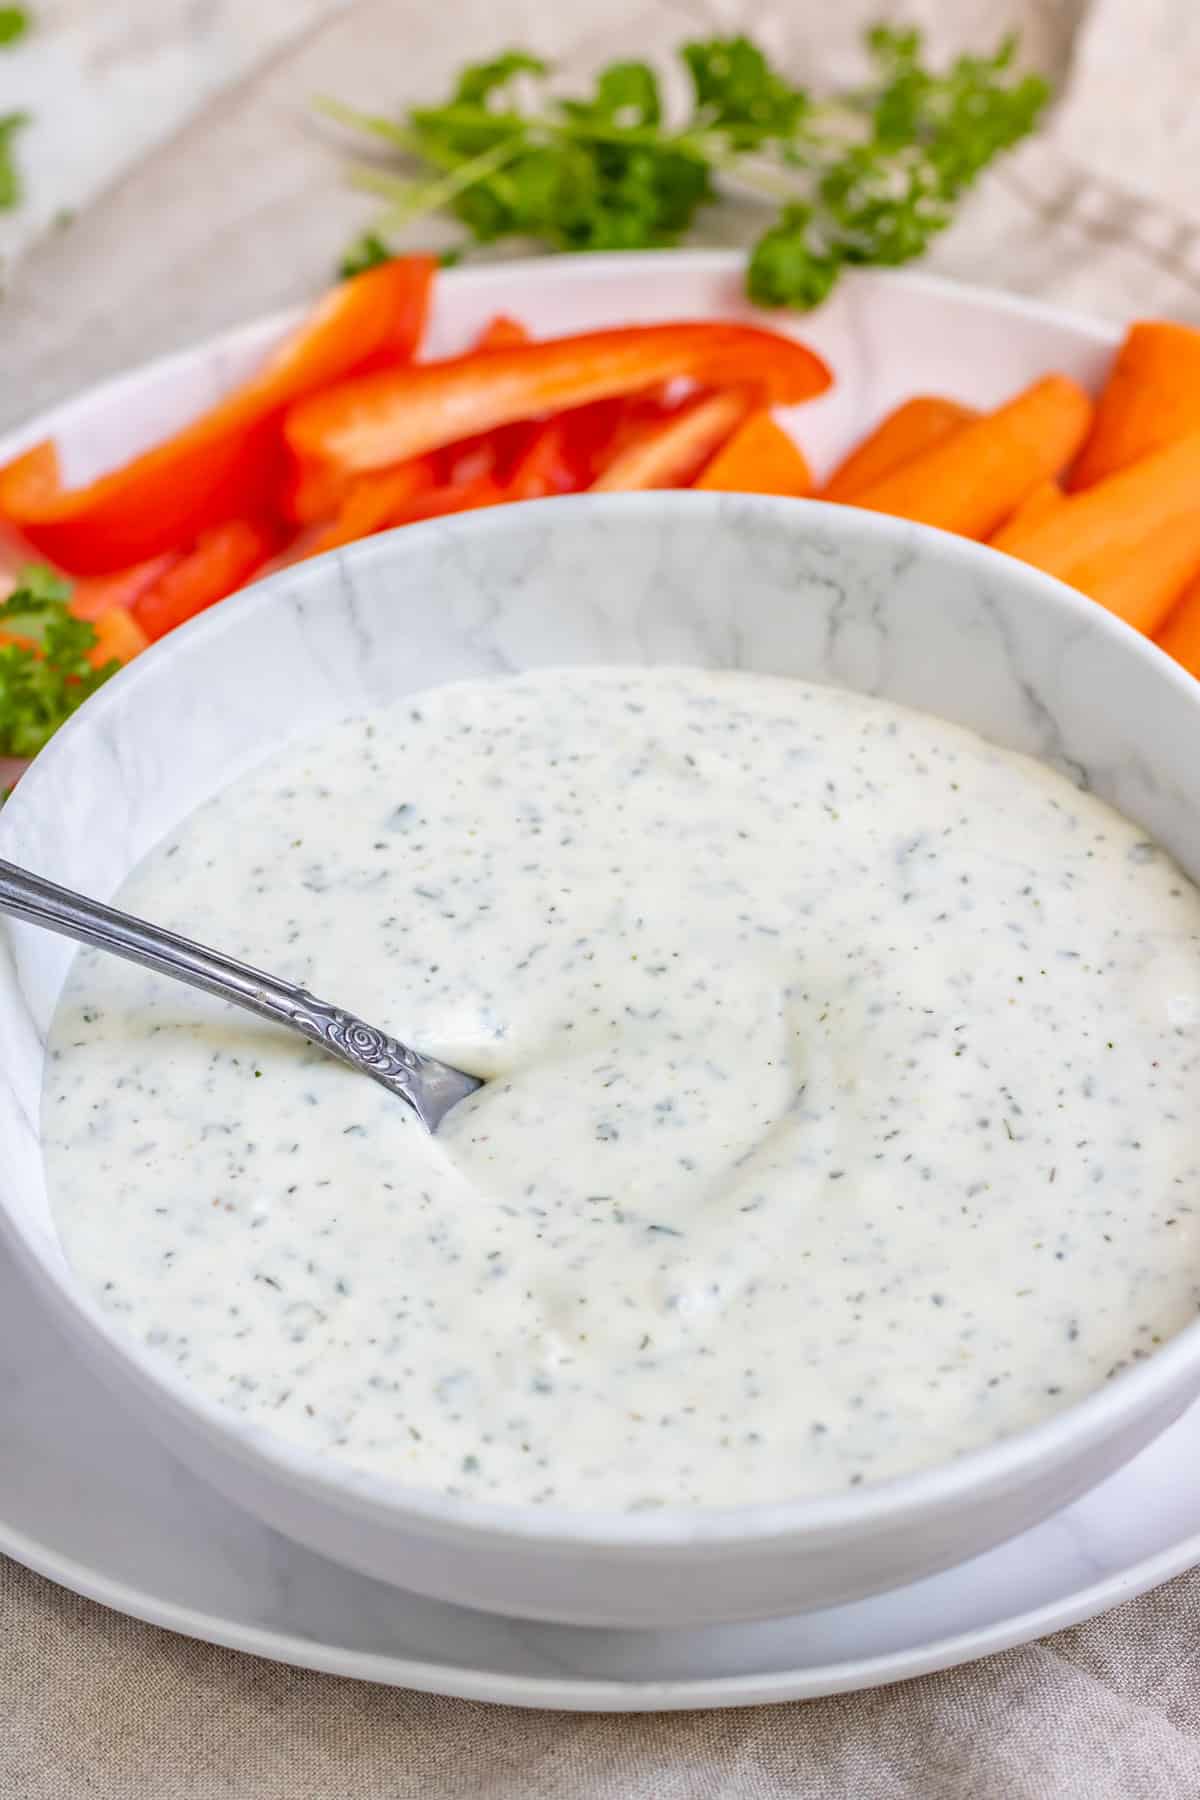 Ranch sauce in a bowl next to raw vegetables.